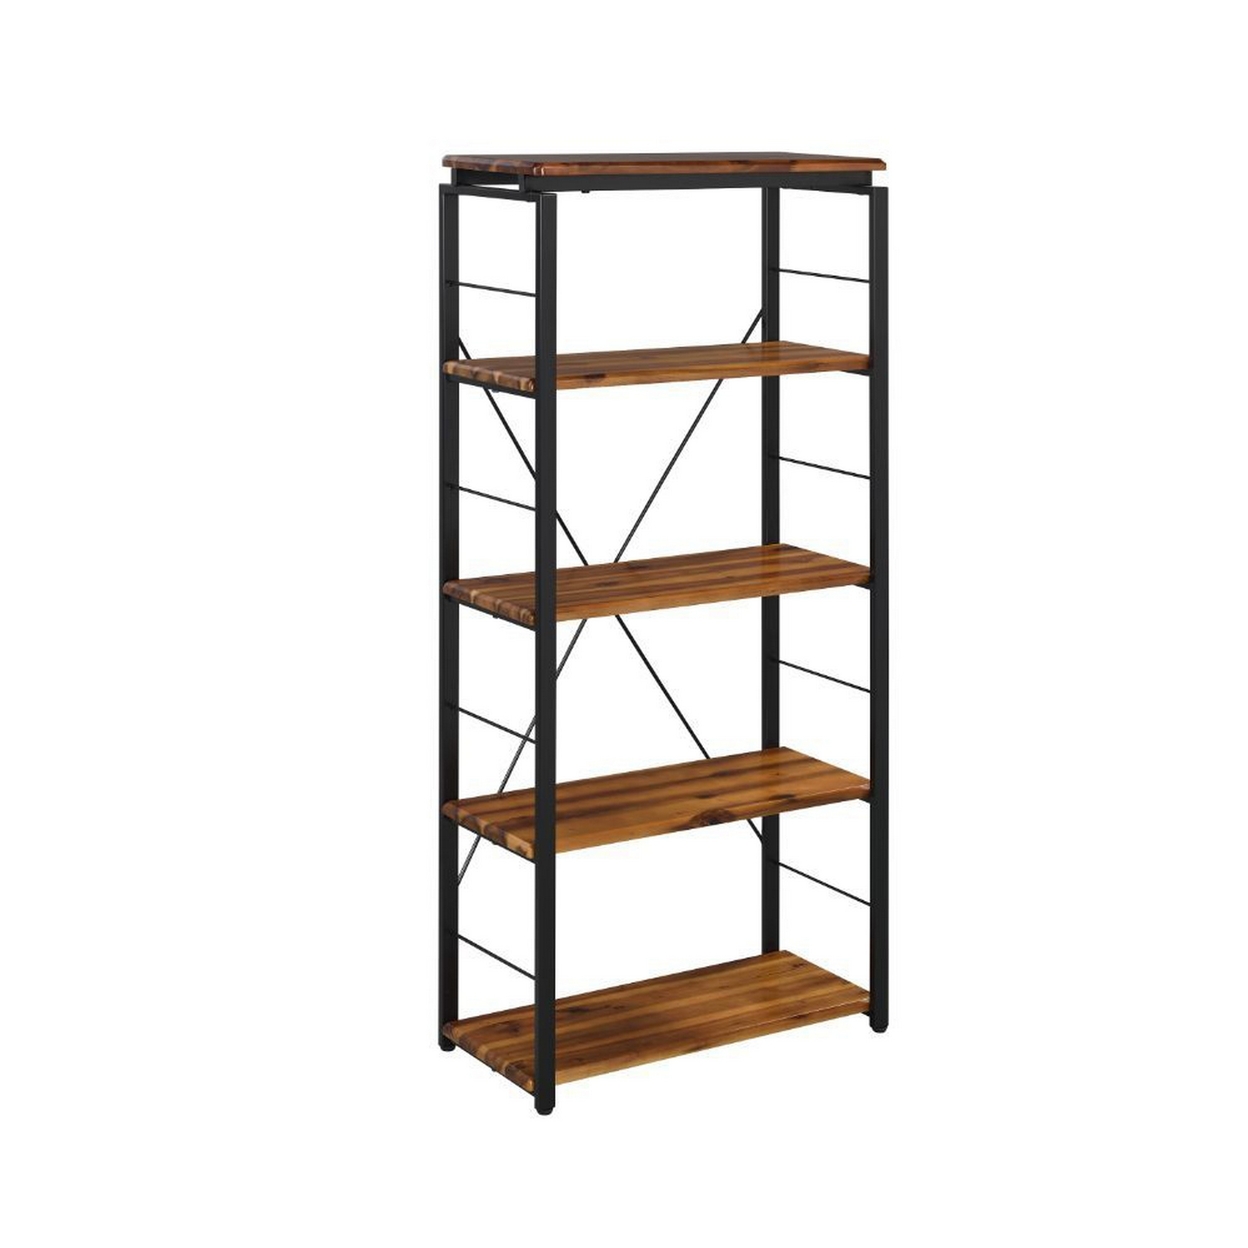 Industrial Bookshelf With 4 Shelves And Open Metal Frame, Brown And Black- Saltoro Sherpi